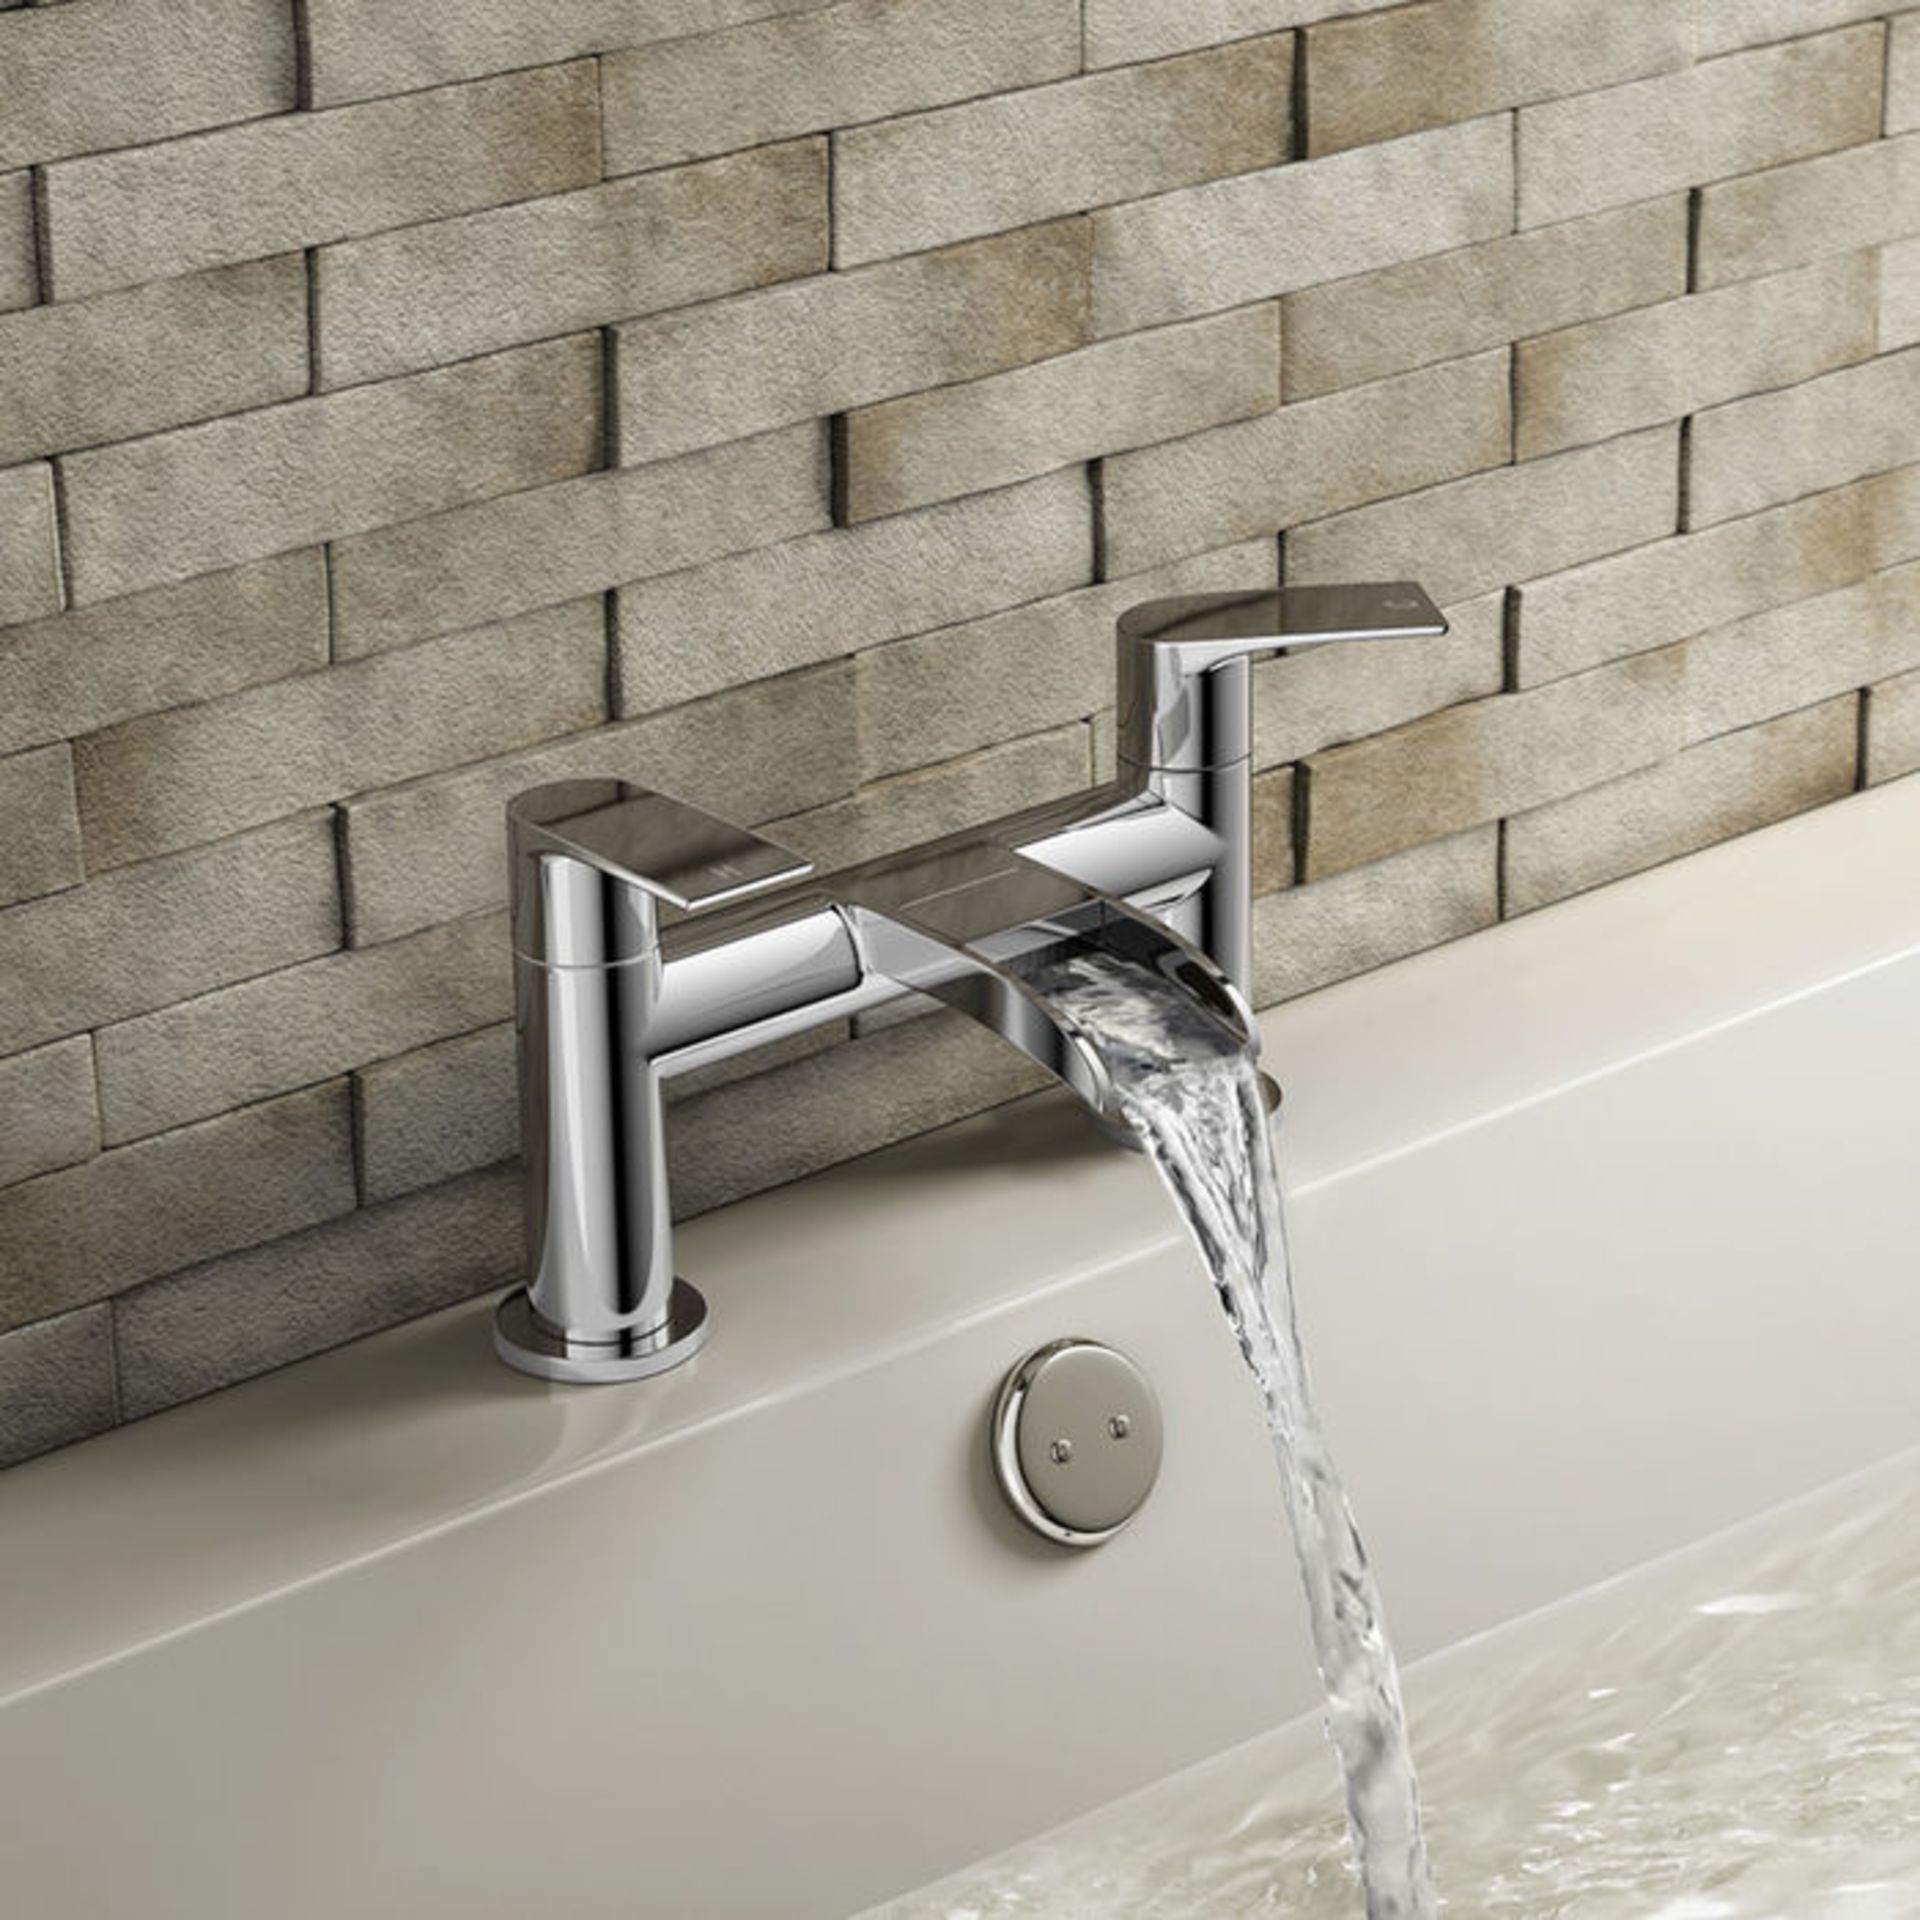 (PA80) Denver Waterfall Bath Filler Mixer Tap Chrome Plated Solid Brass 1/4 turn solid brass valve